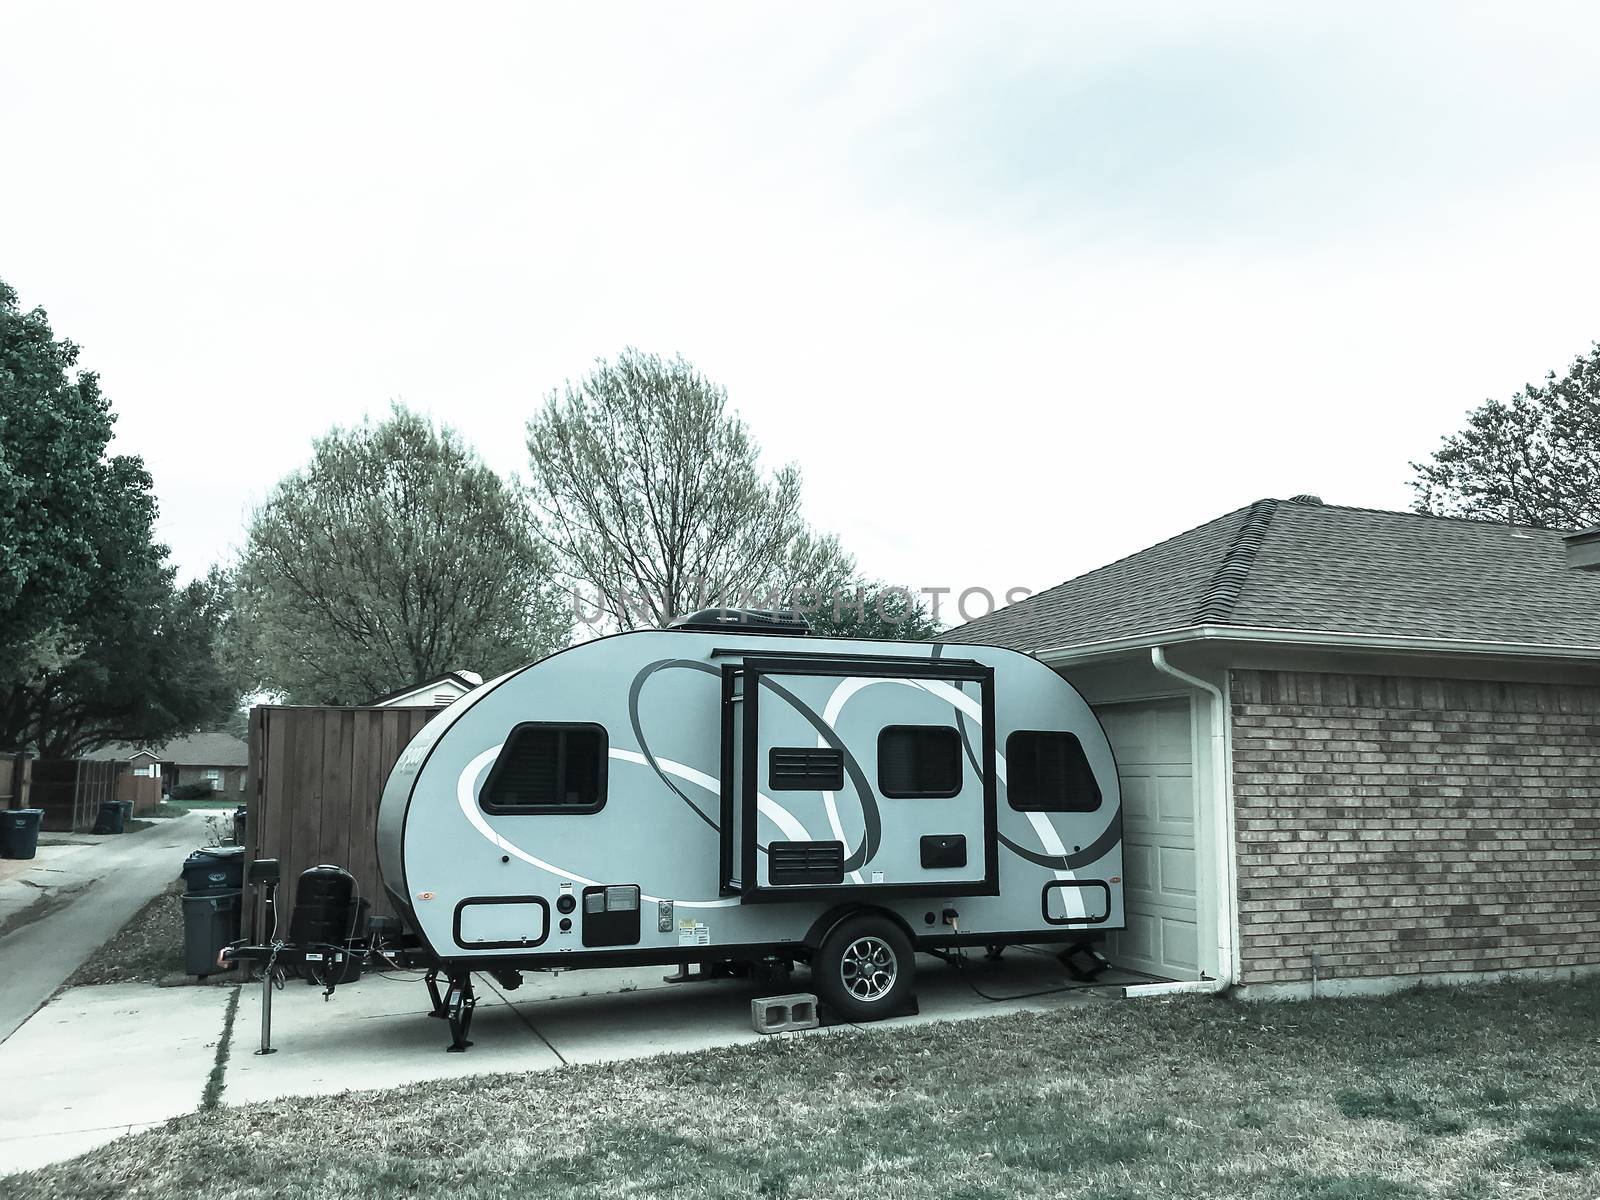 RV trailer parked at backyard of single family house, side view by trongnguyen